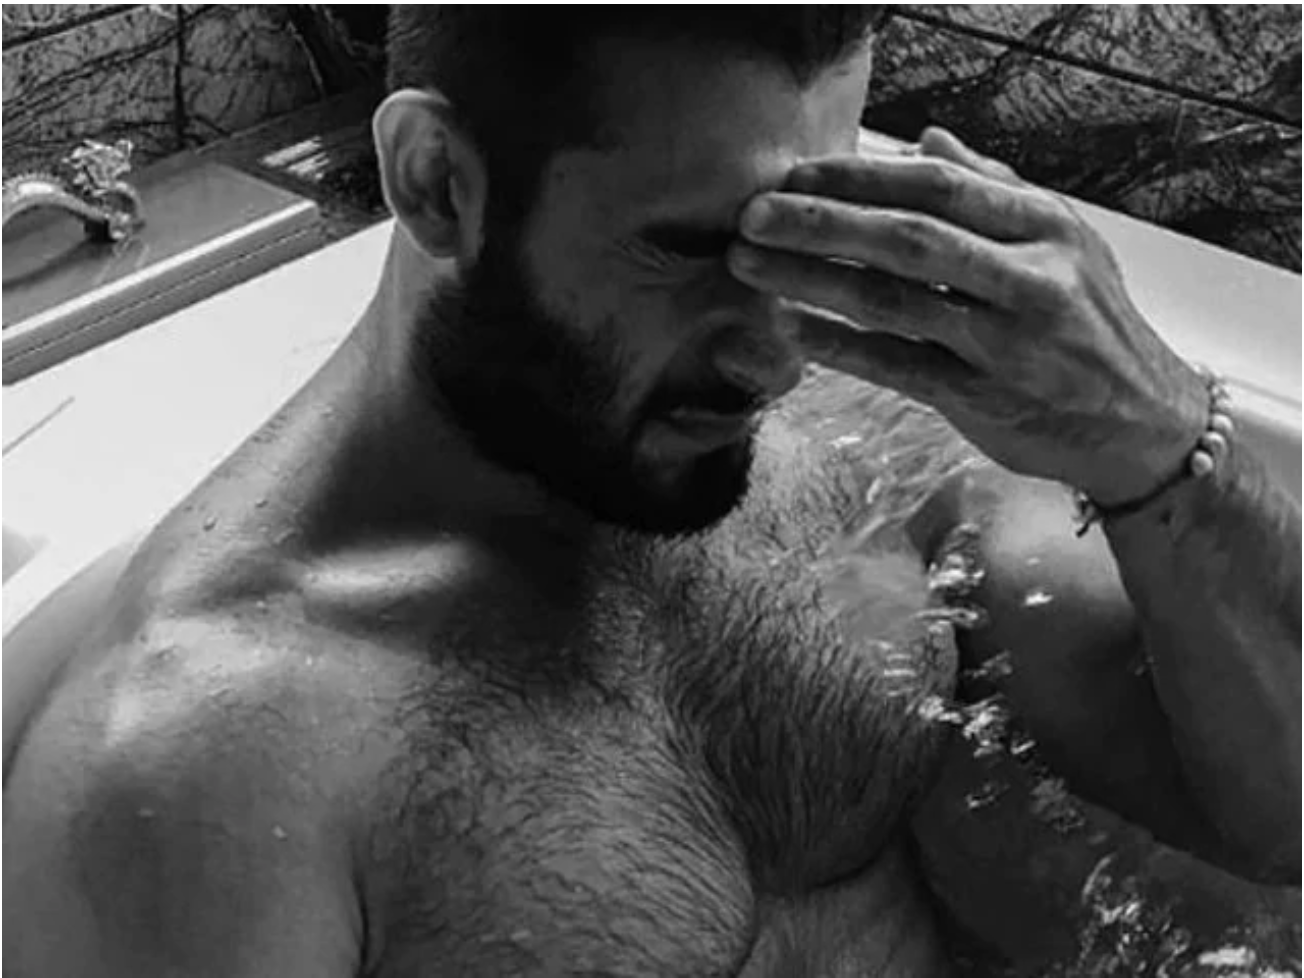 Britney Spears fans are relieved that she seems very happy with boyfriend Sam Asghari. Picture: Instagram. Britney Spears fans are relieved that she seems very happy with boyfriend Sam Asghari. Picture: Instagram.Source:Supplied